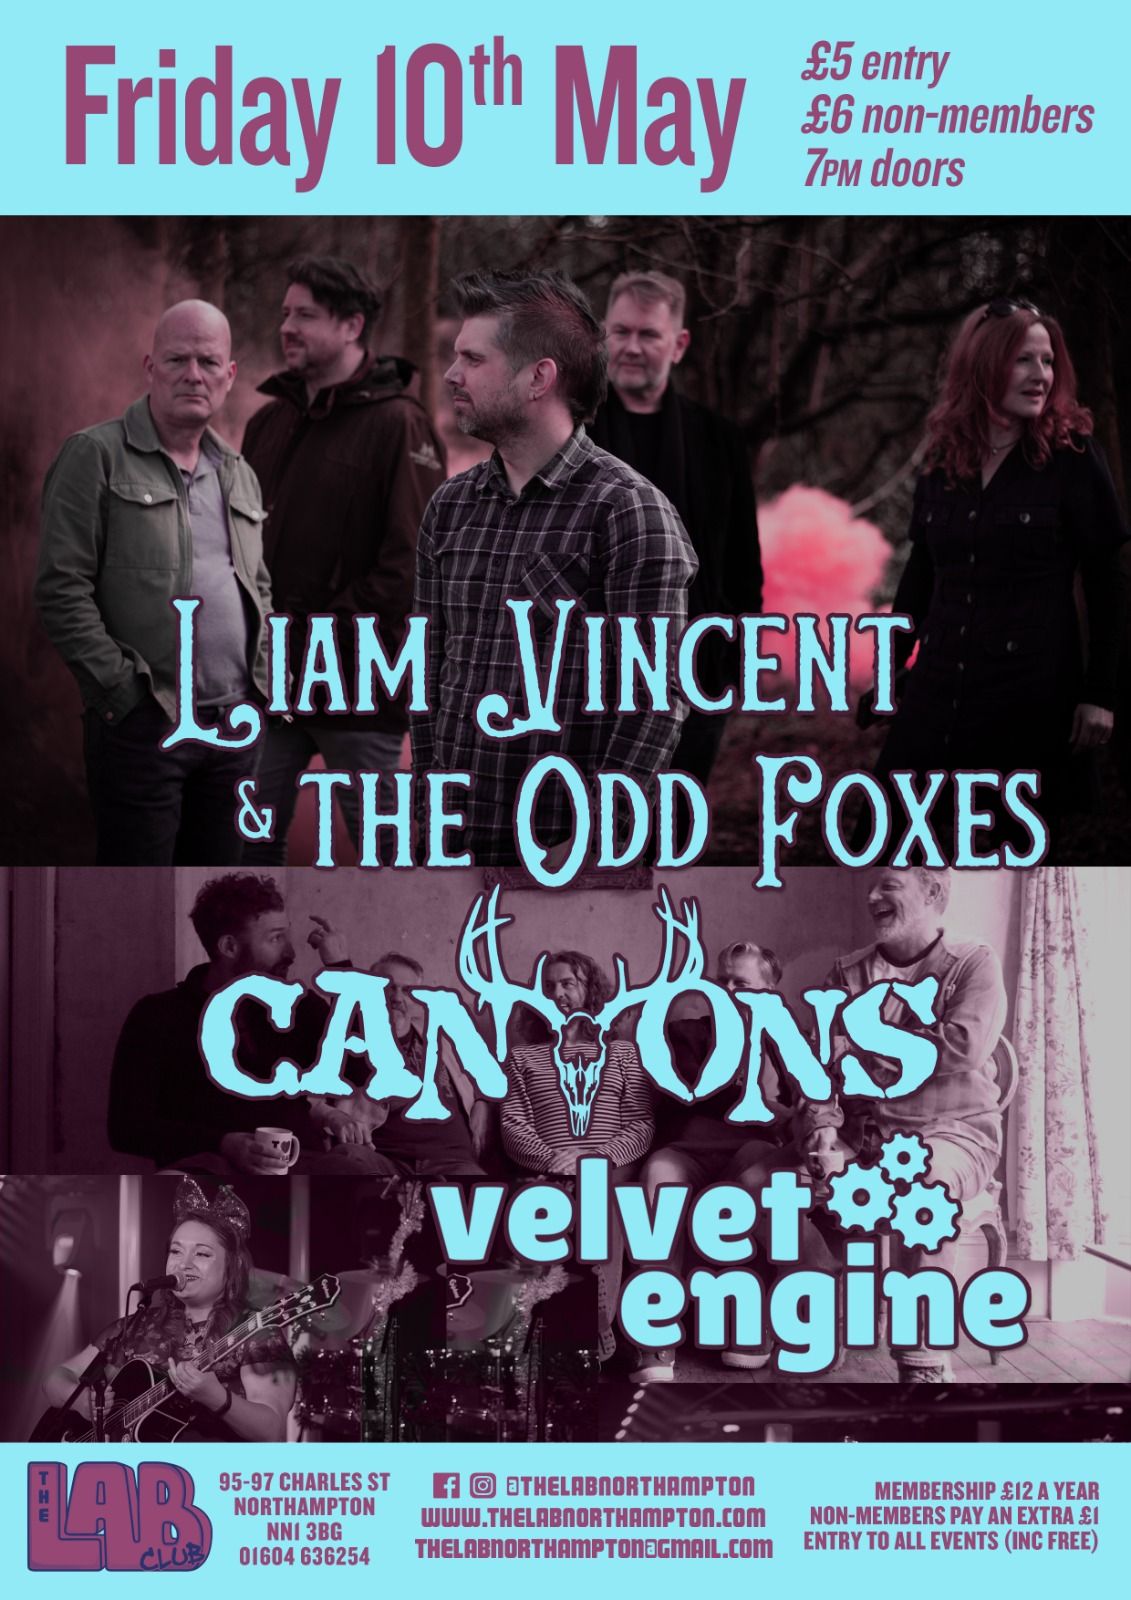 Liam Vincent & The Odd Foxes, Canyons & Velvet Engine